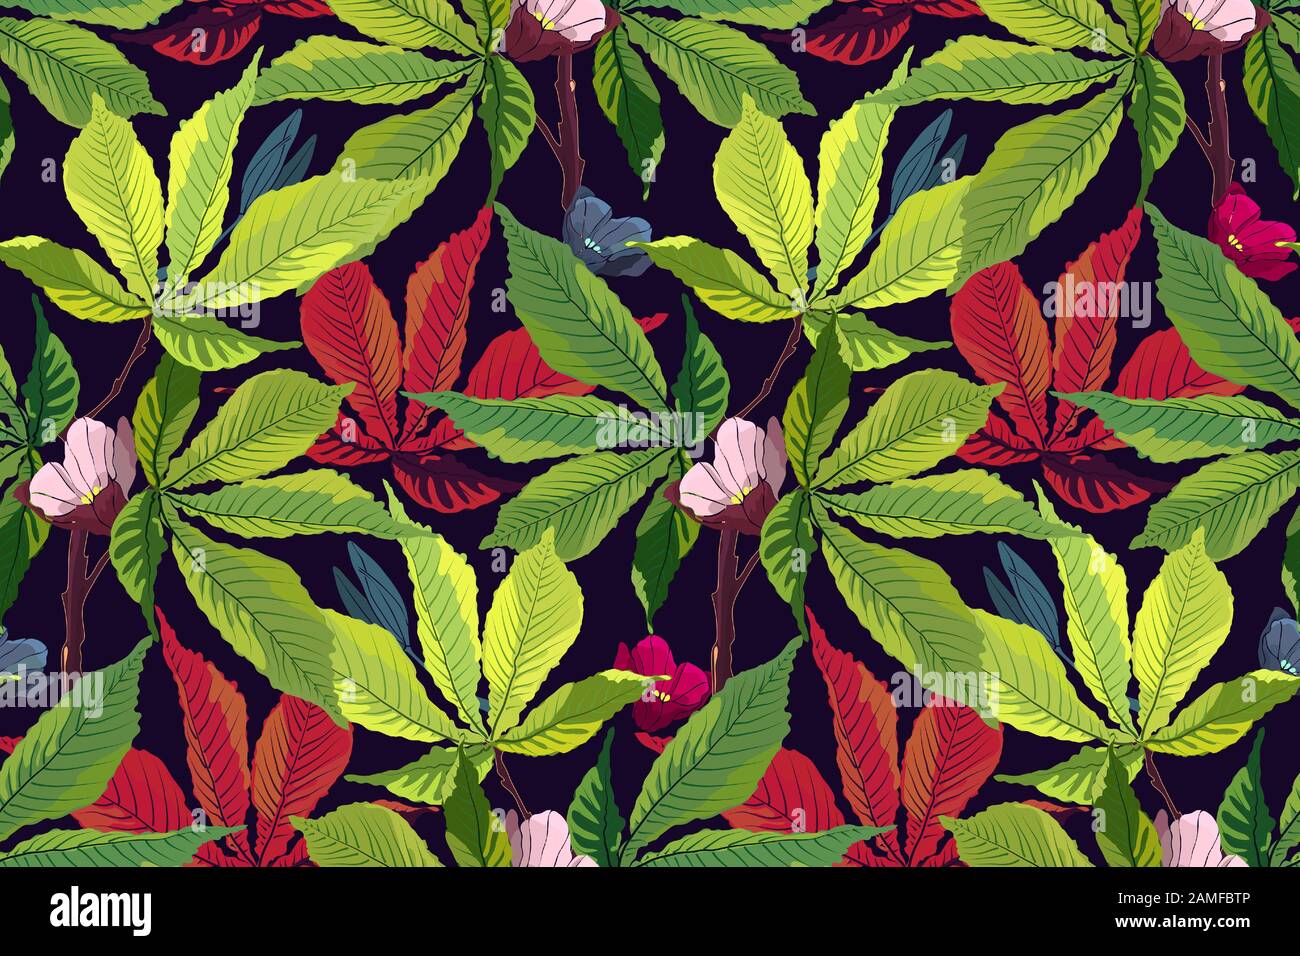 Art floral vector tropical pattern. Green leaves. Stock Vector